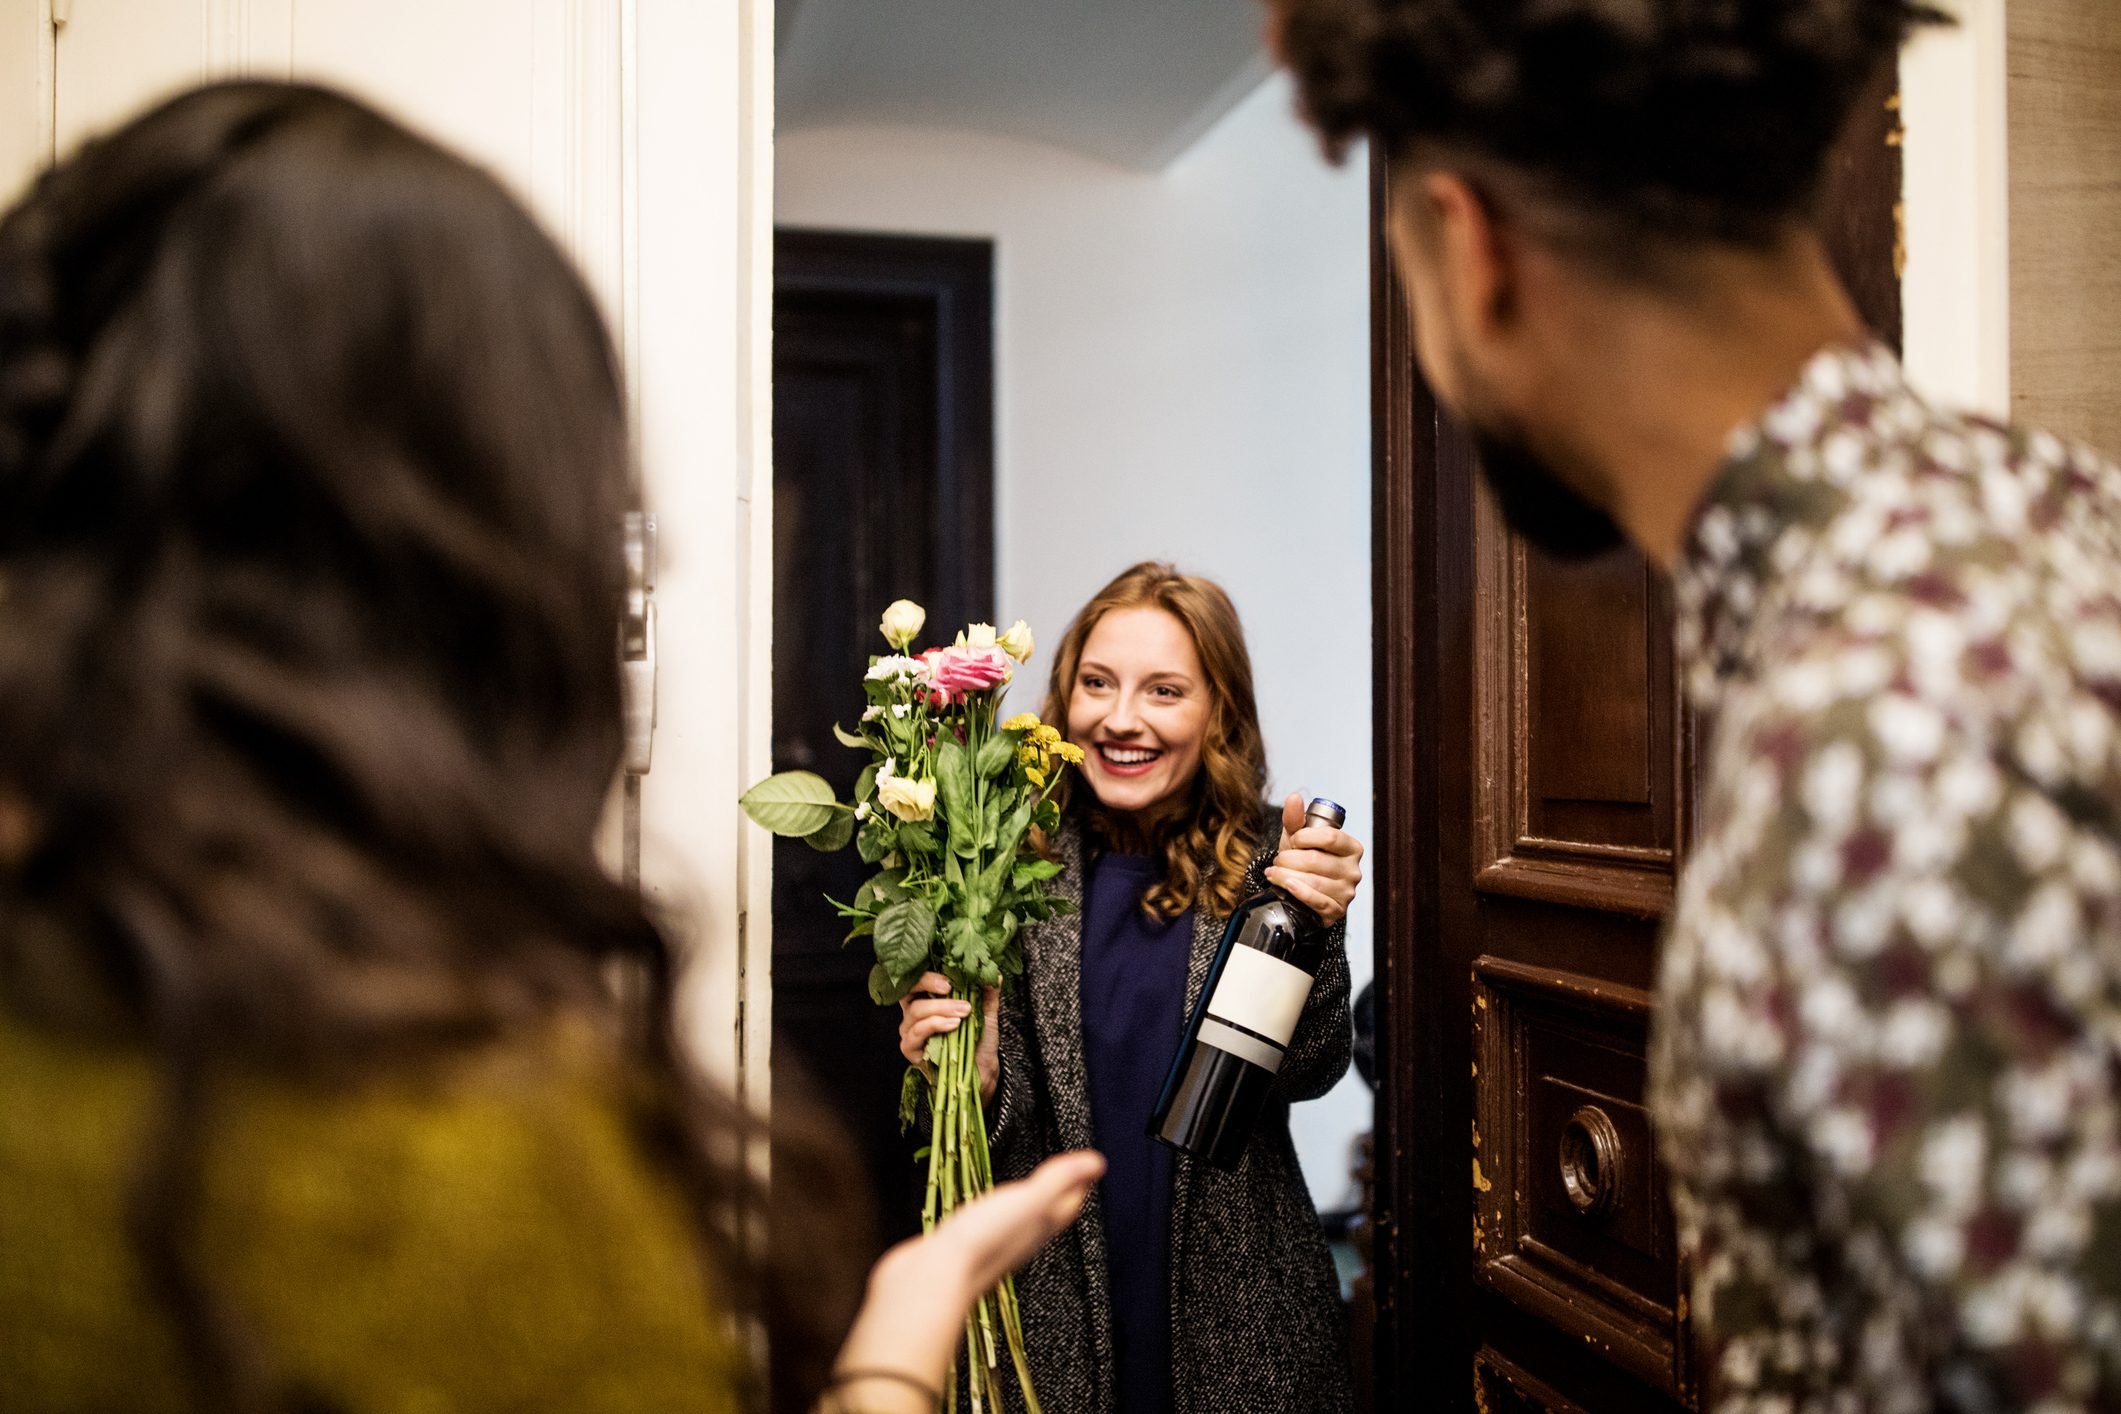 Woman holding bouquet and wine bottle while visiting friends